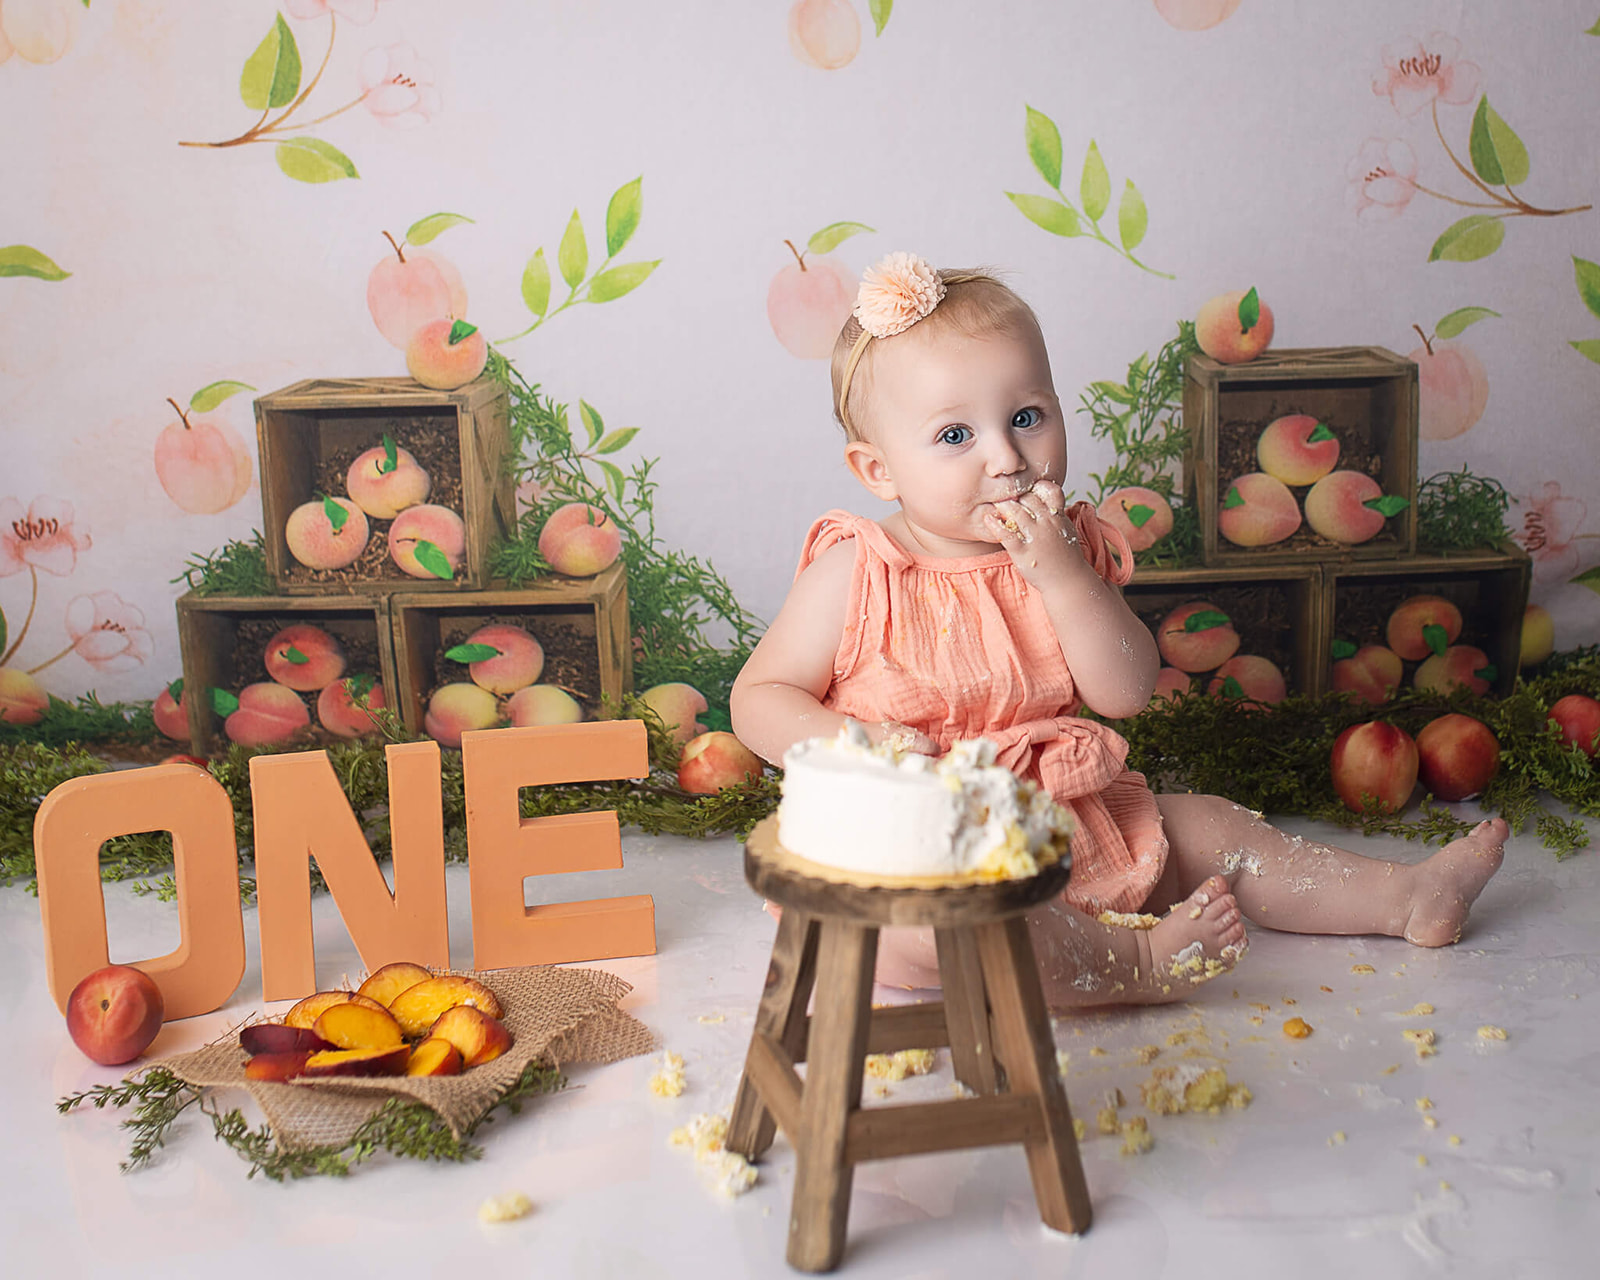 Akron, OH newborn photographer captures little one during their cake smash photoshoot